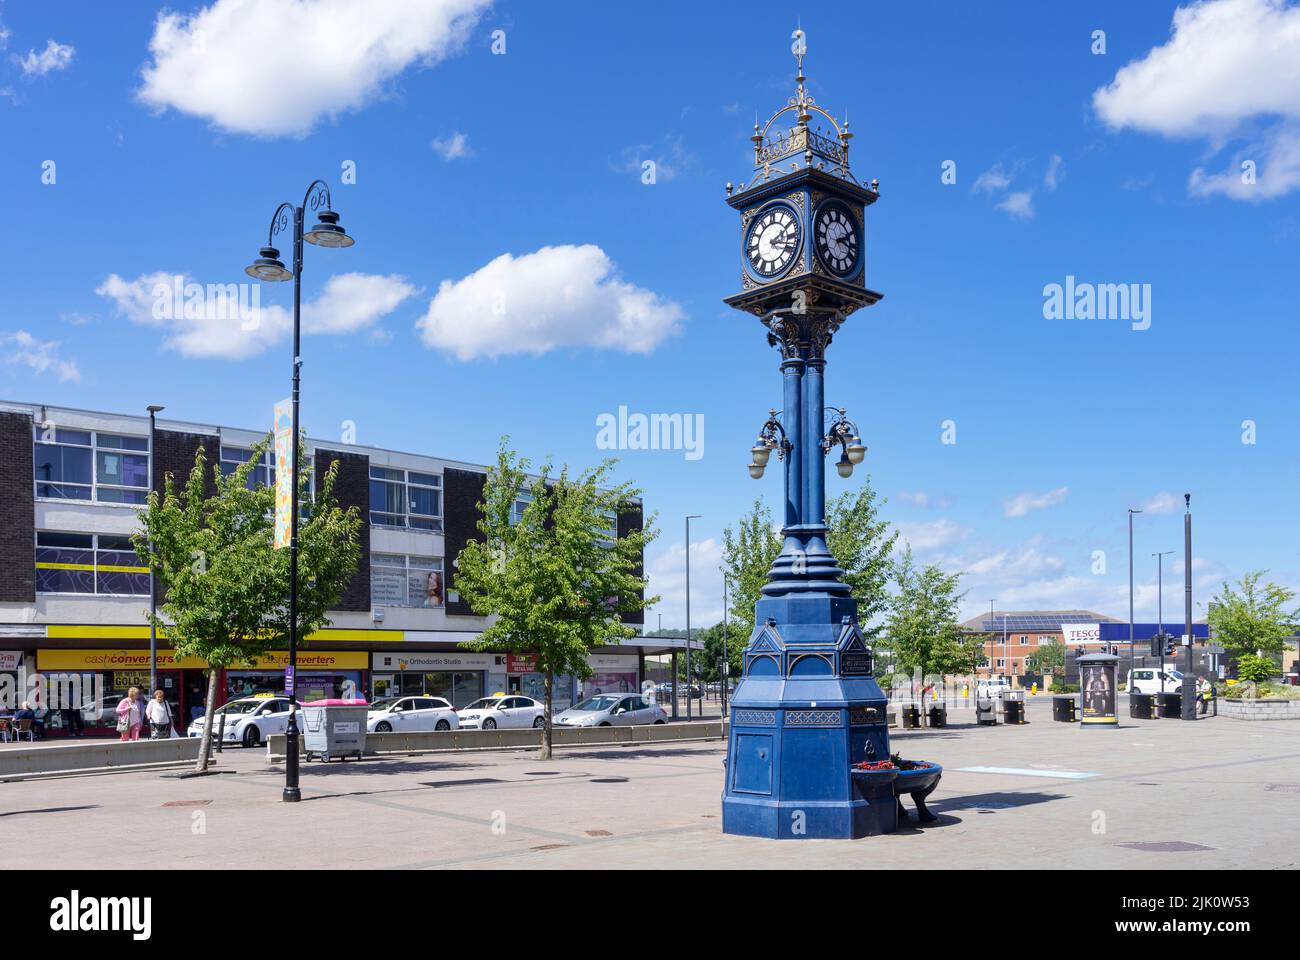 Die Hastings-Uhr, eine gusseiserne Uhr in Effingham Square Rotherham Town Centre Rotherham South Yorkshire England GB Europa Stockfoto